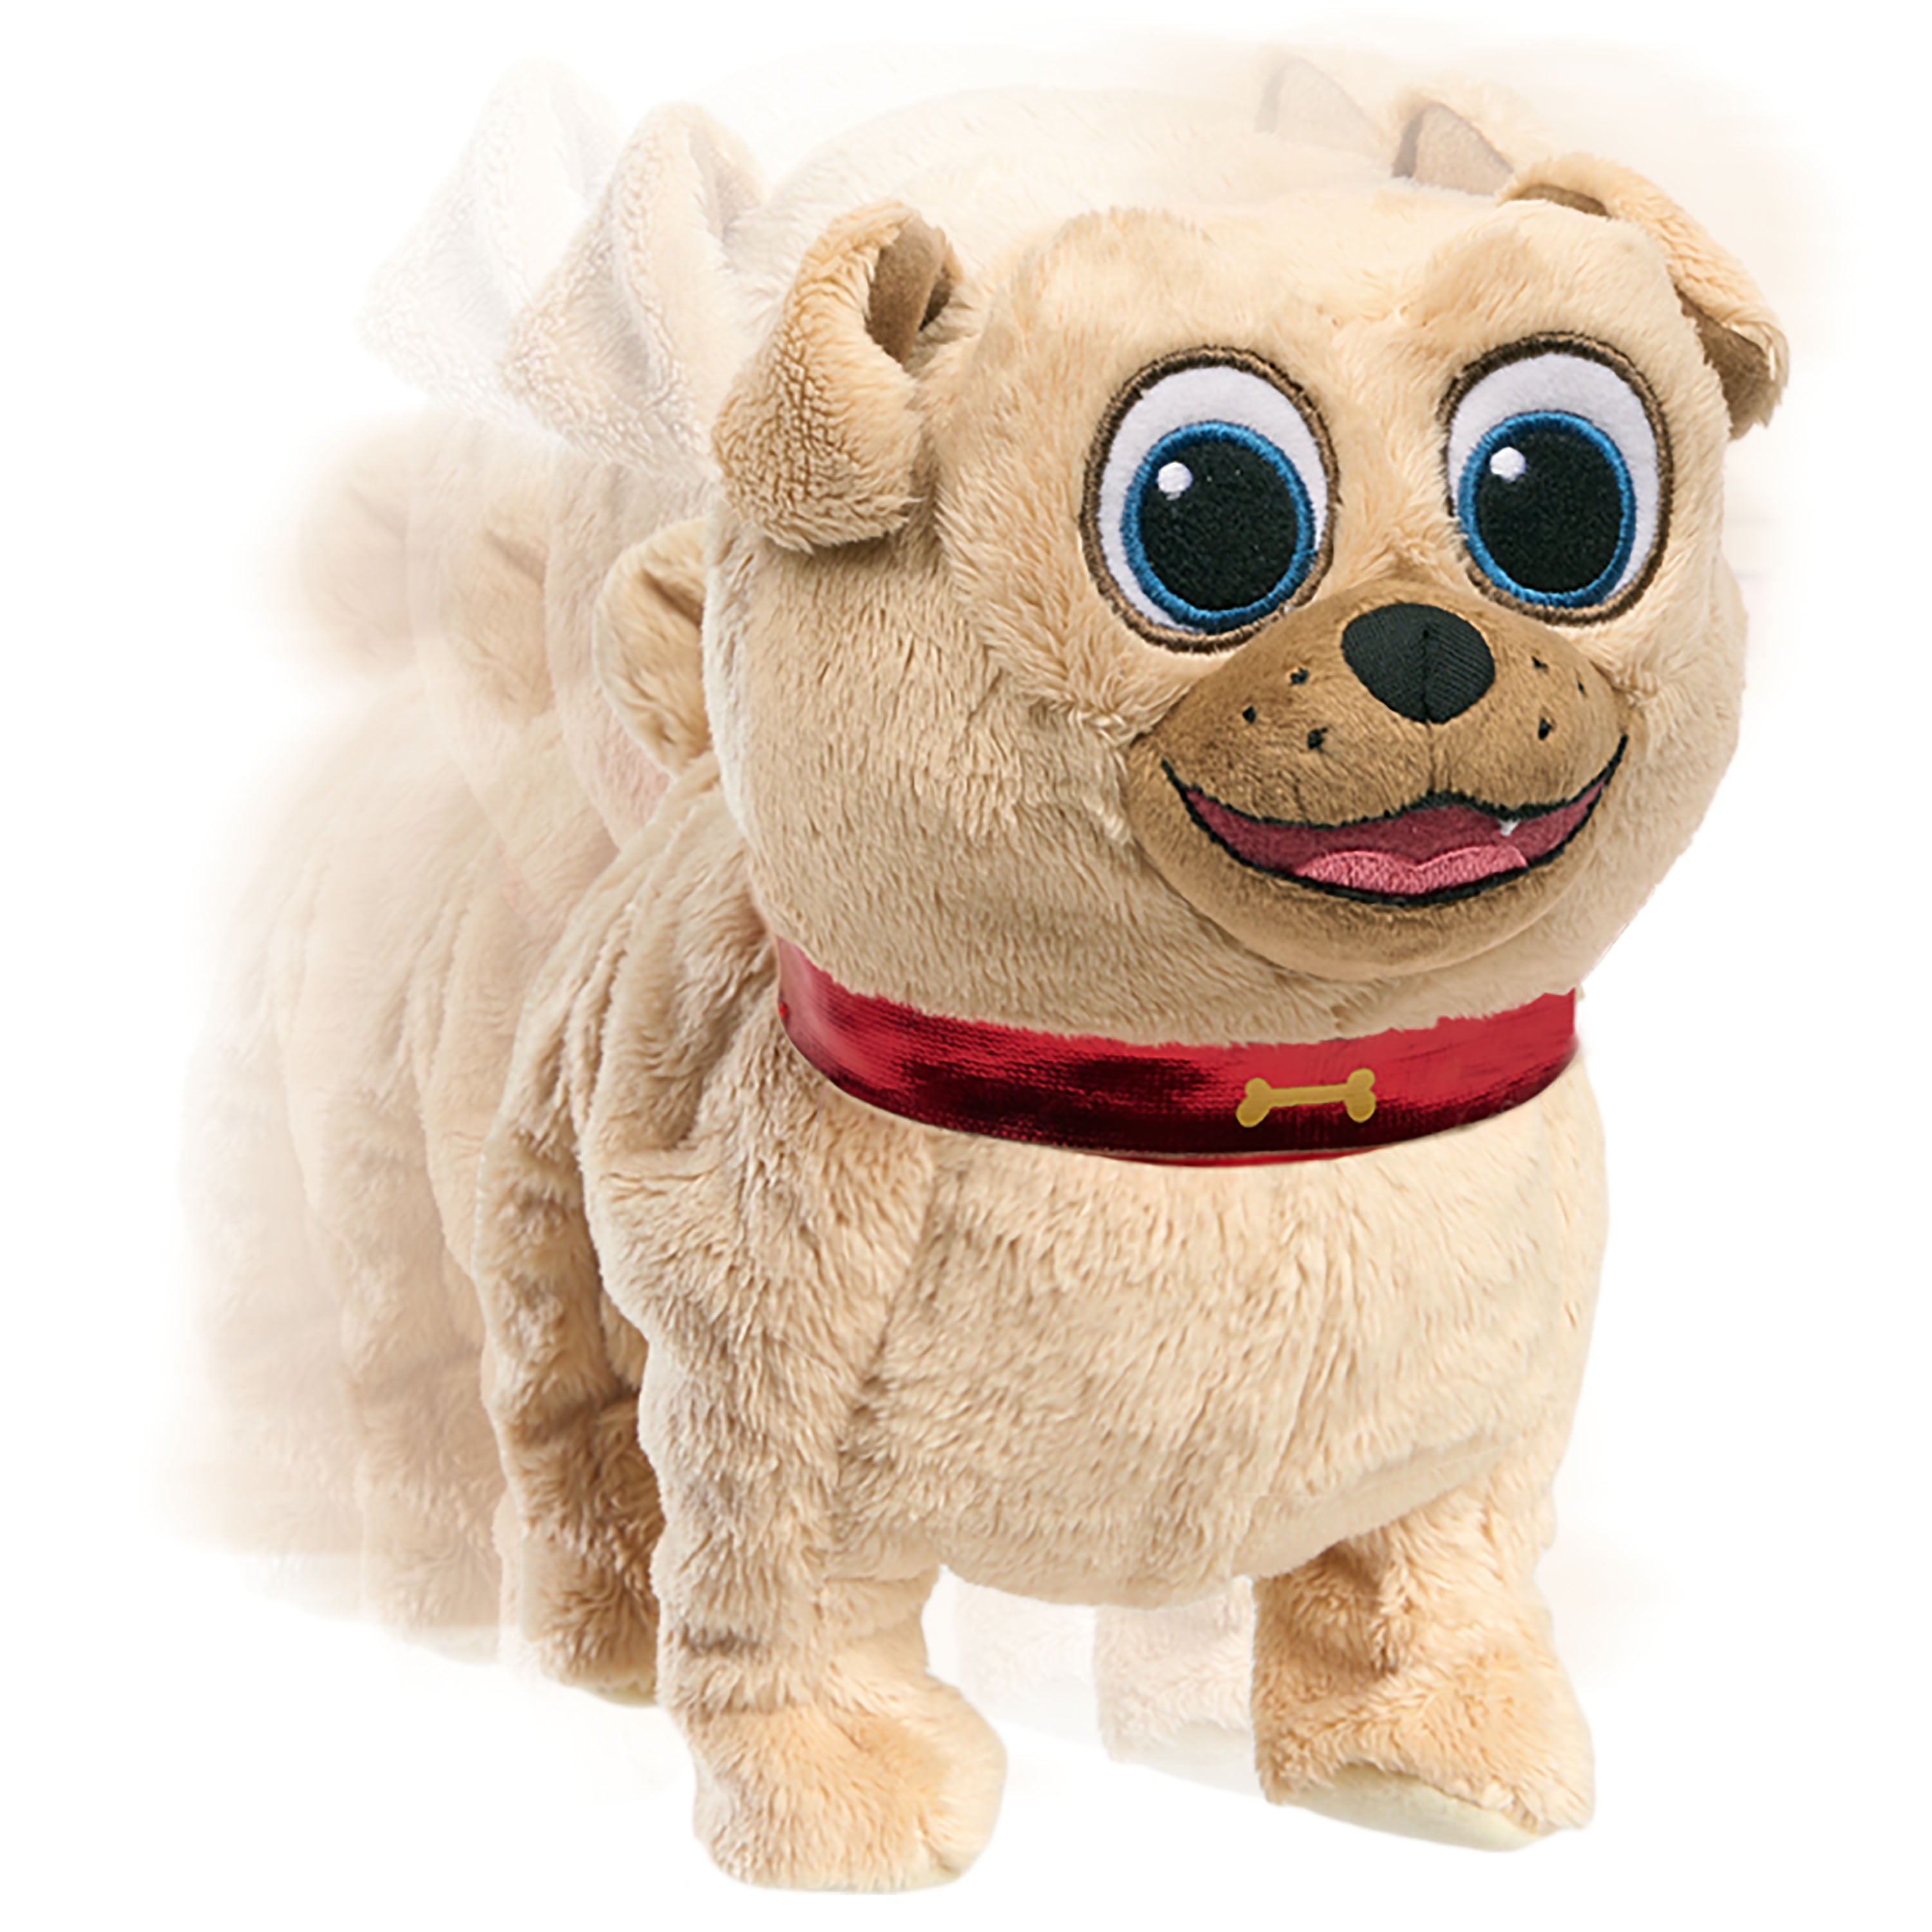 puppy dog pals walking rolly